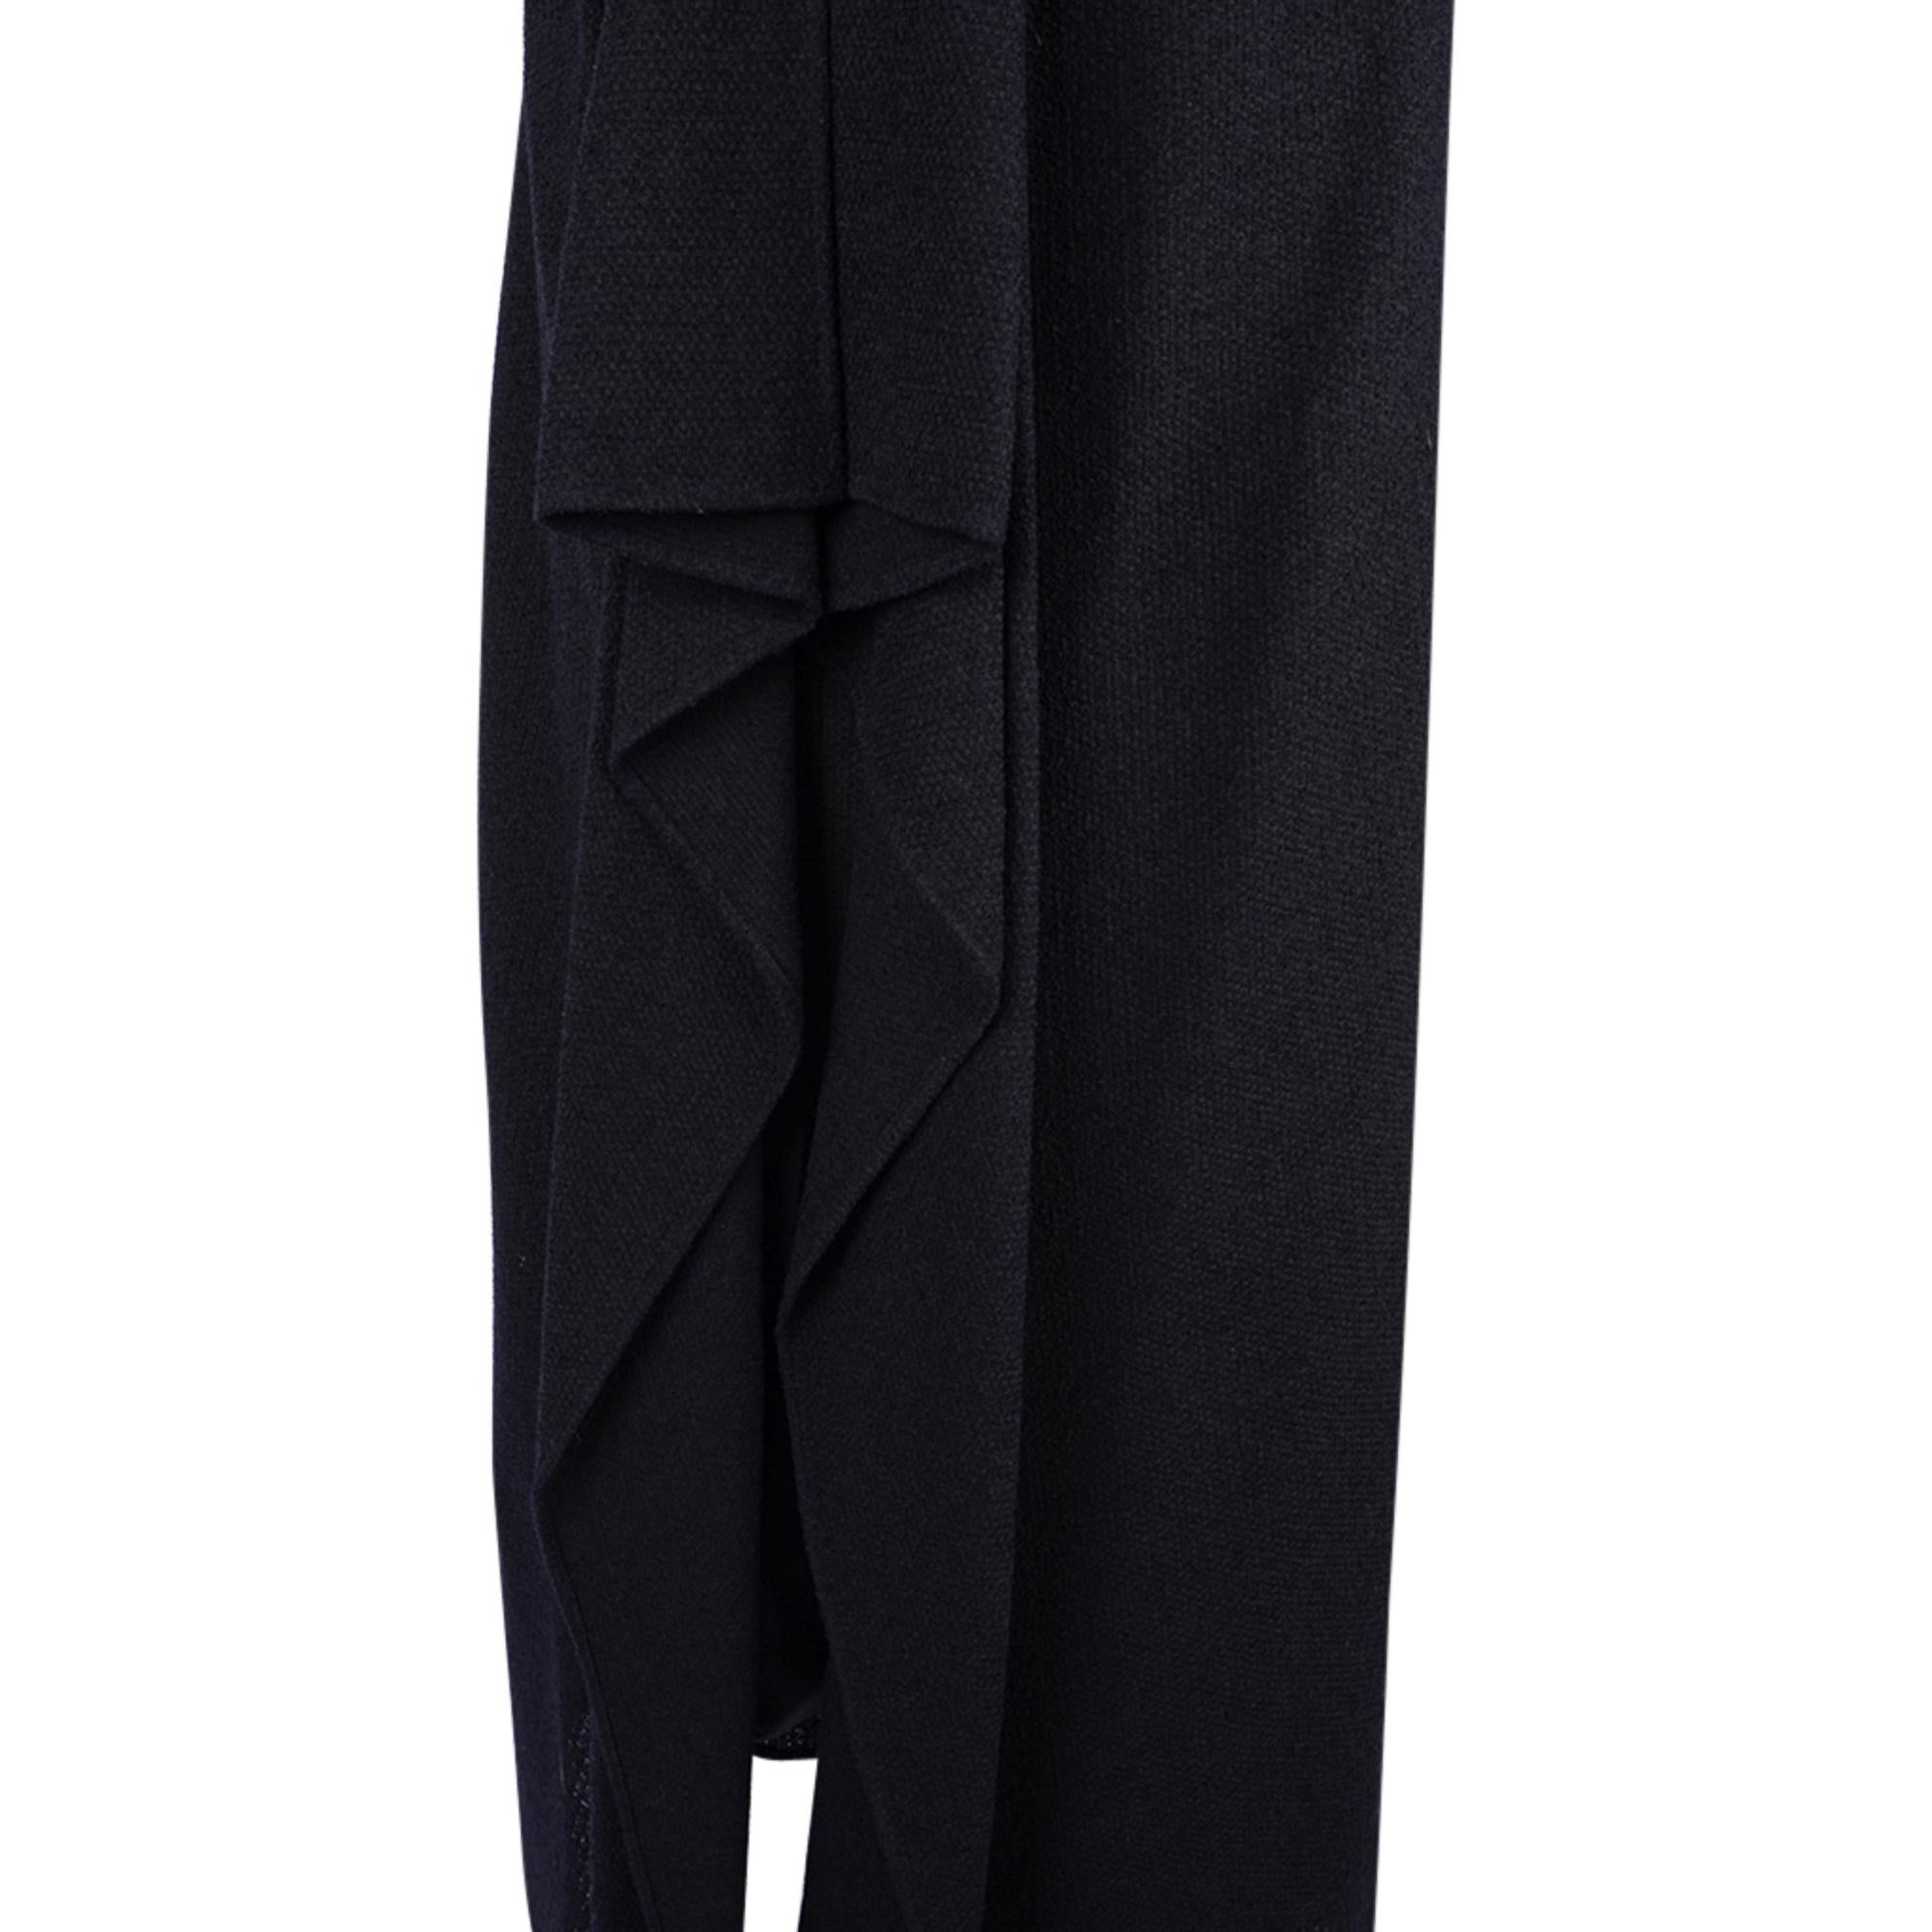 Chanel 98A Long Straight Skirt Beautifully Draped Rear 36 / 4 For Sale 3